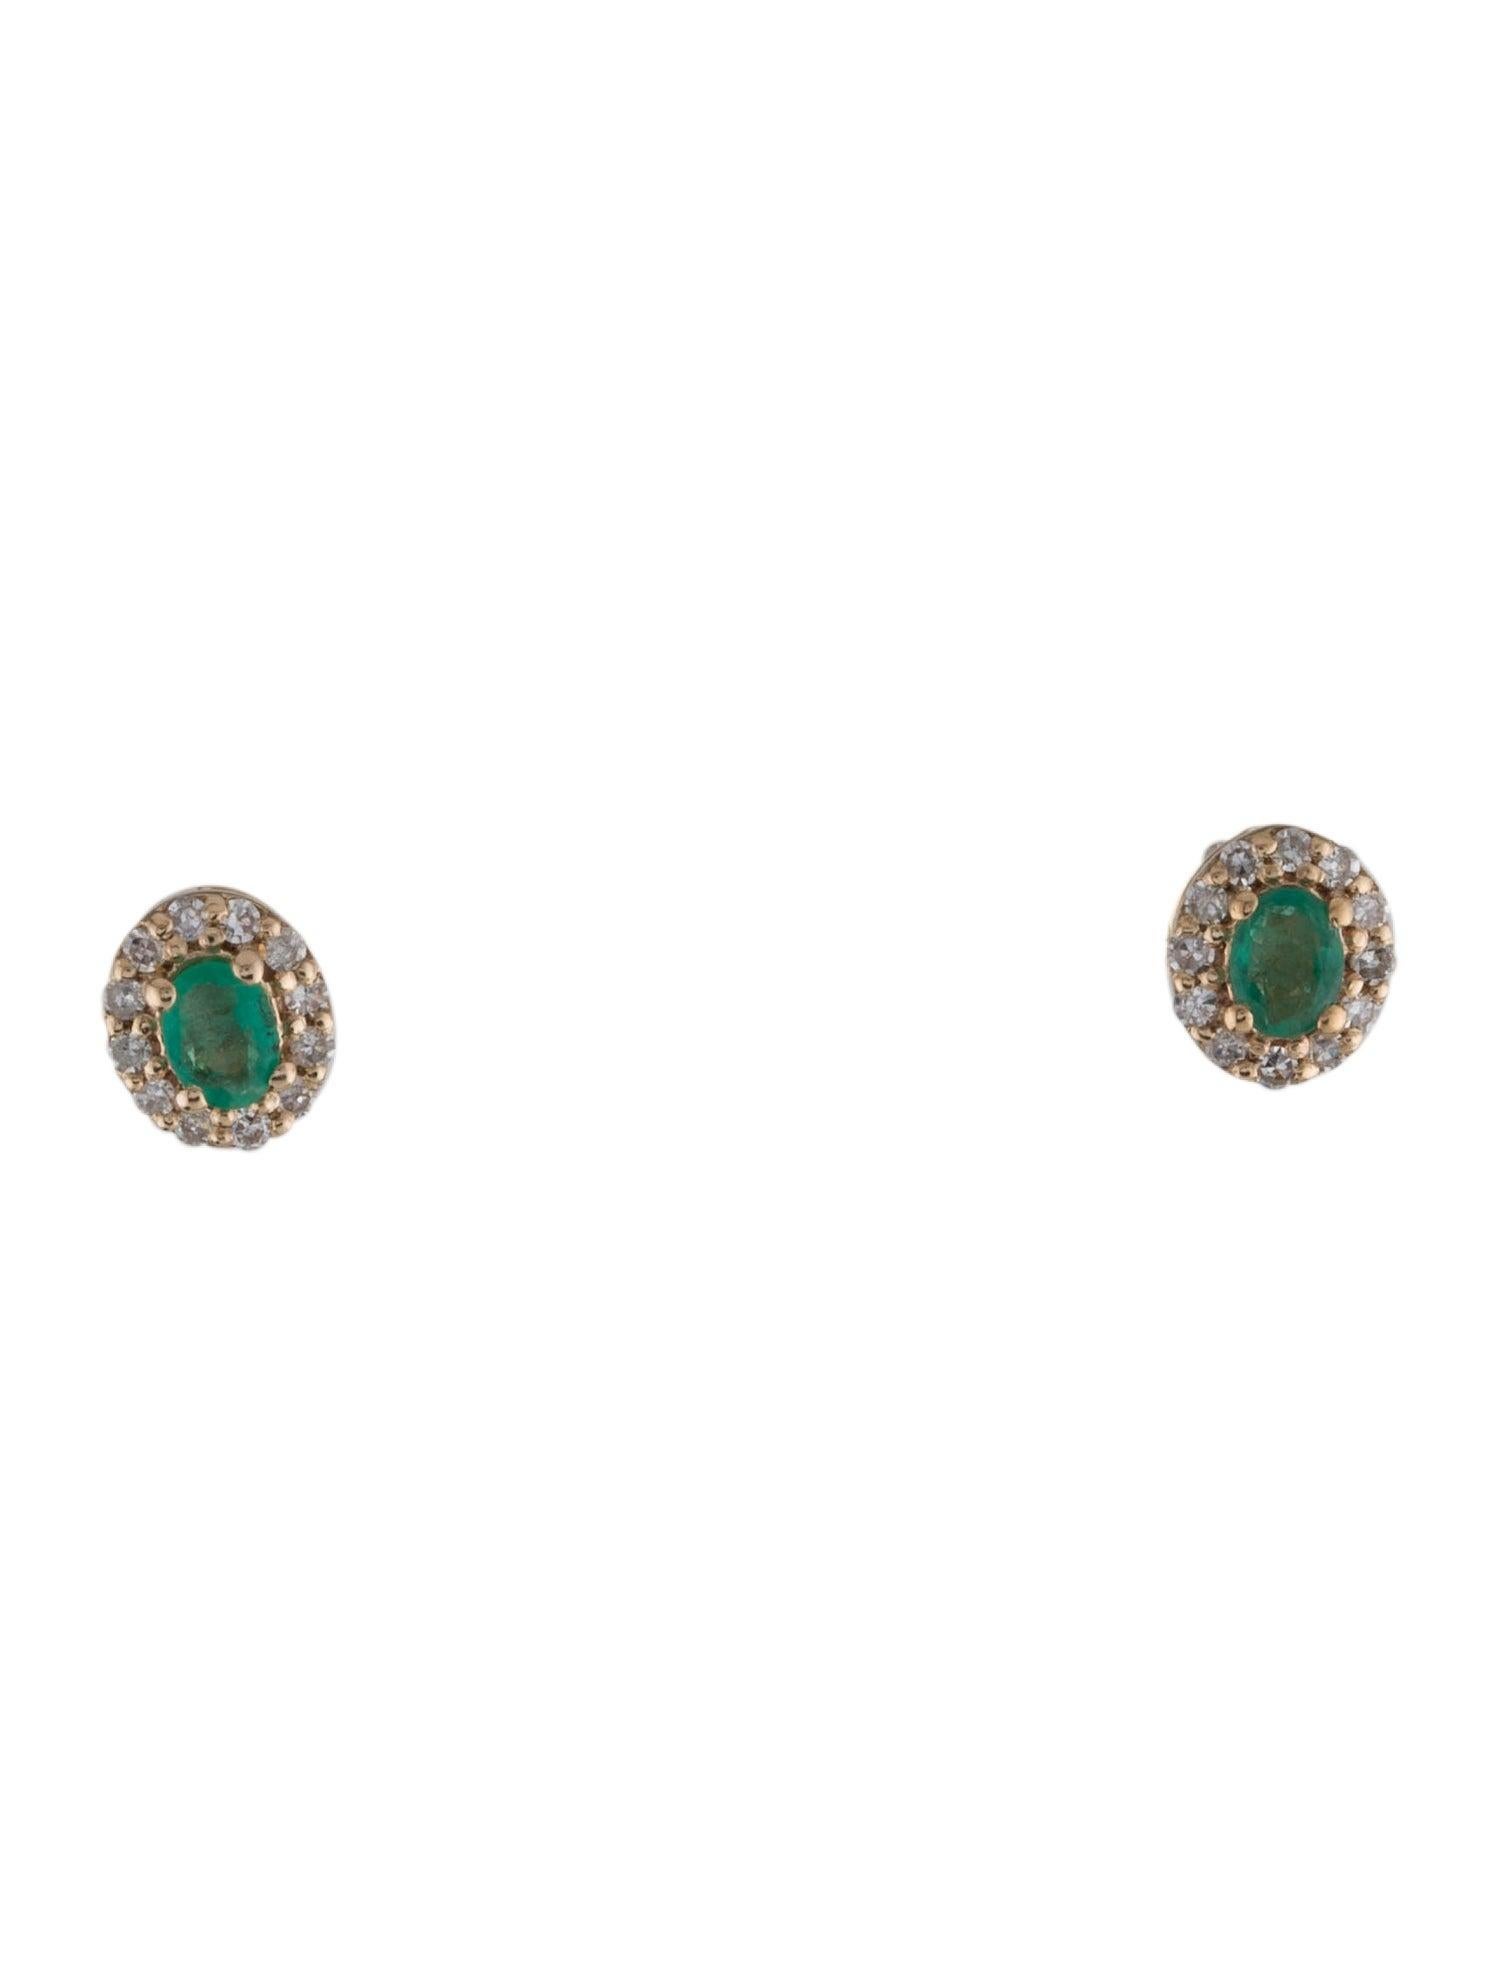 Immerse yourself in the enchanting allure of nature with our Forest Ferns Emerald and Diamond Earrings from Jeweltique. This exquisite collection takes inspiration from the verdant forests of the world, capturing the essence of lush landscapes and